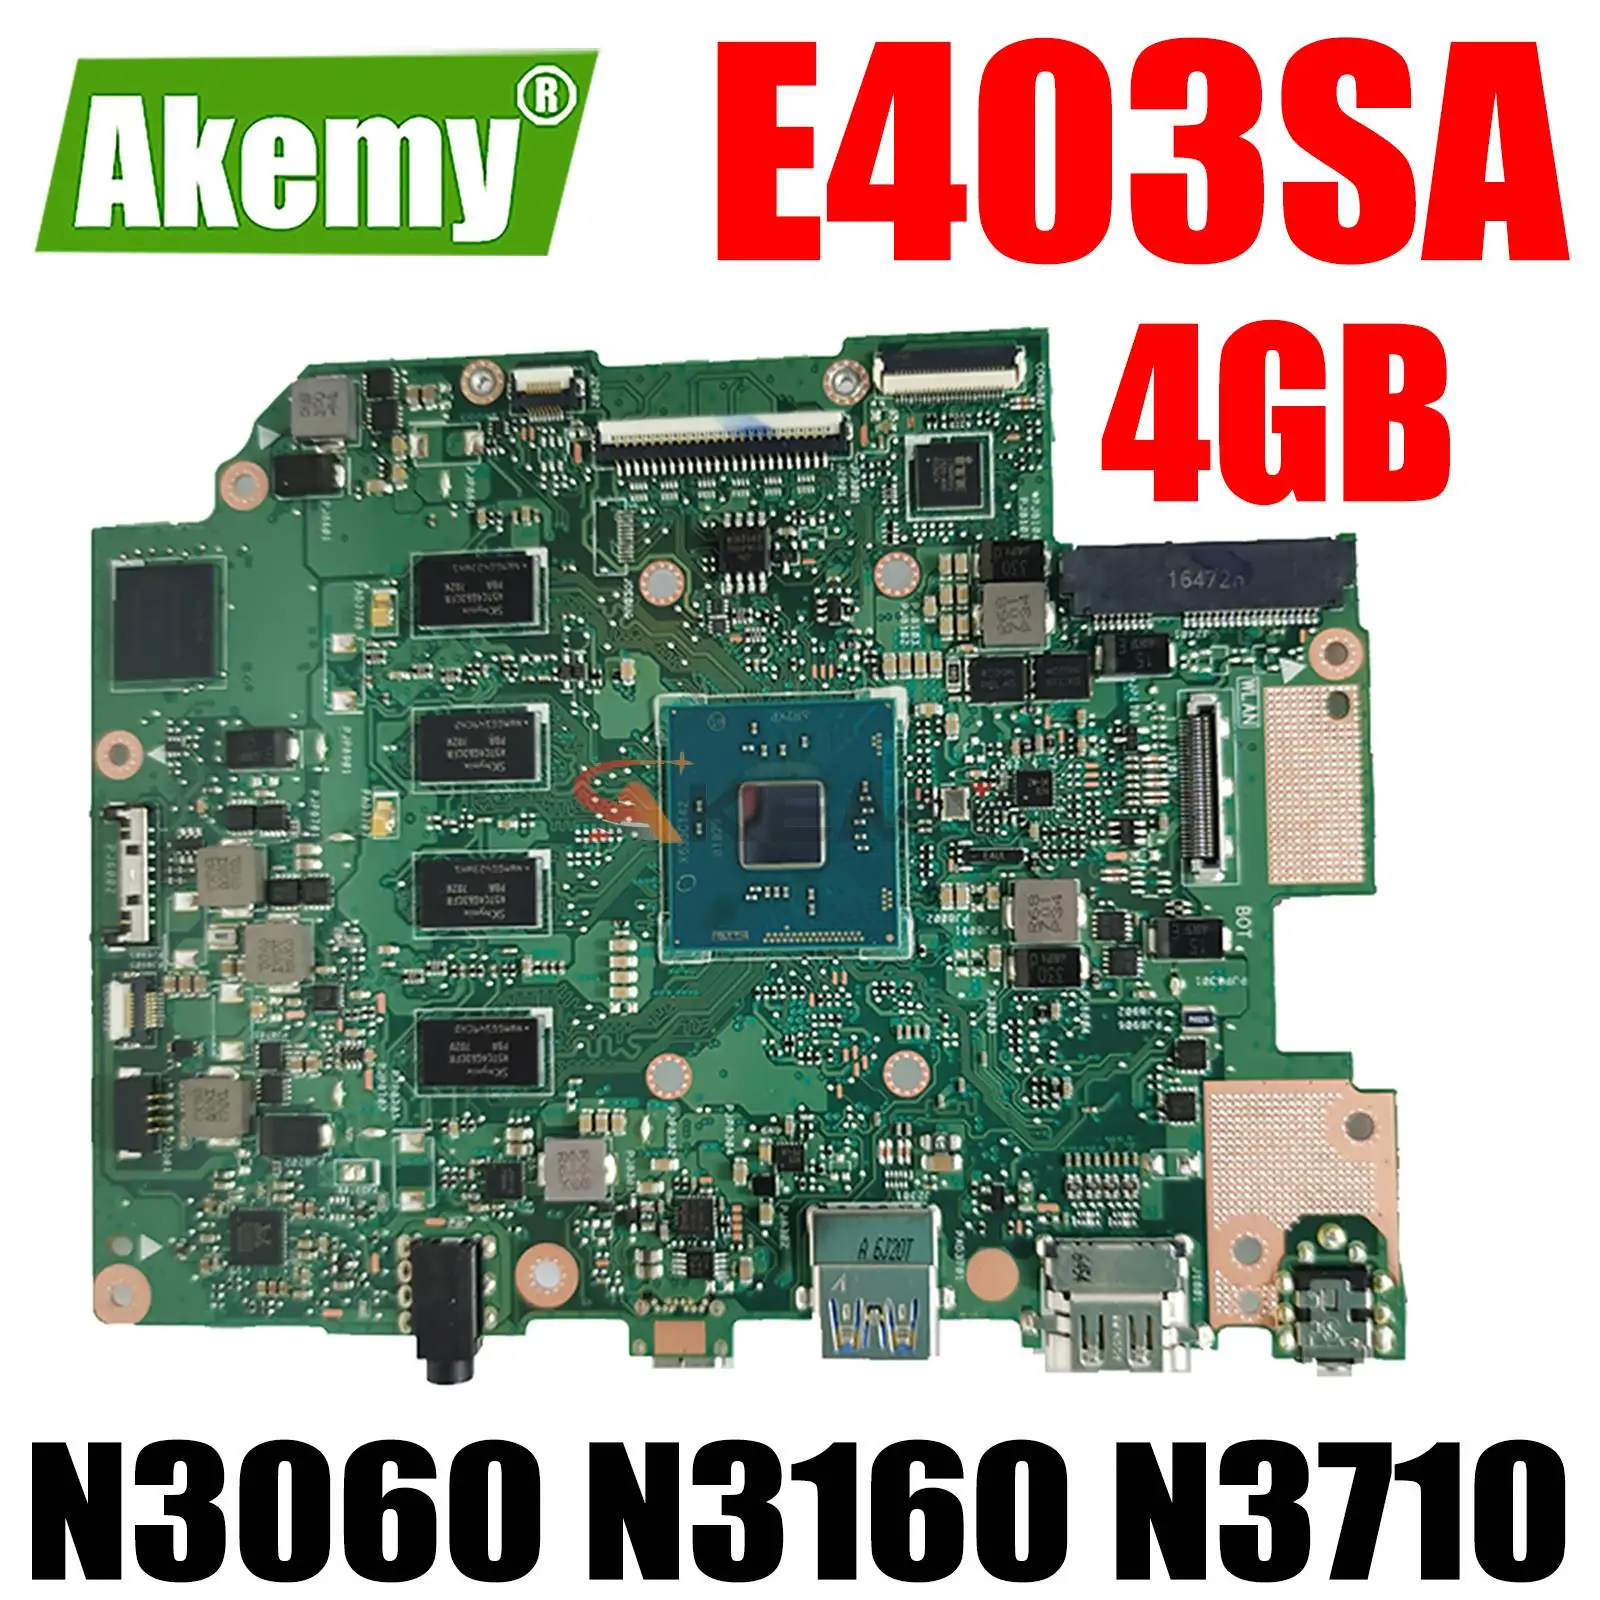 

E403SA original MainBoard w/ 4GB RAM N3050 N3060 N3150 N3160 N3700 N3710 CPU 64G 128G for ASUS E403SA E403S Laptop Motherboard